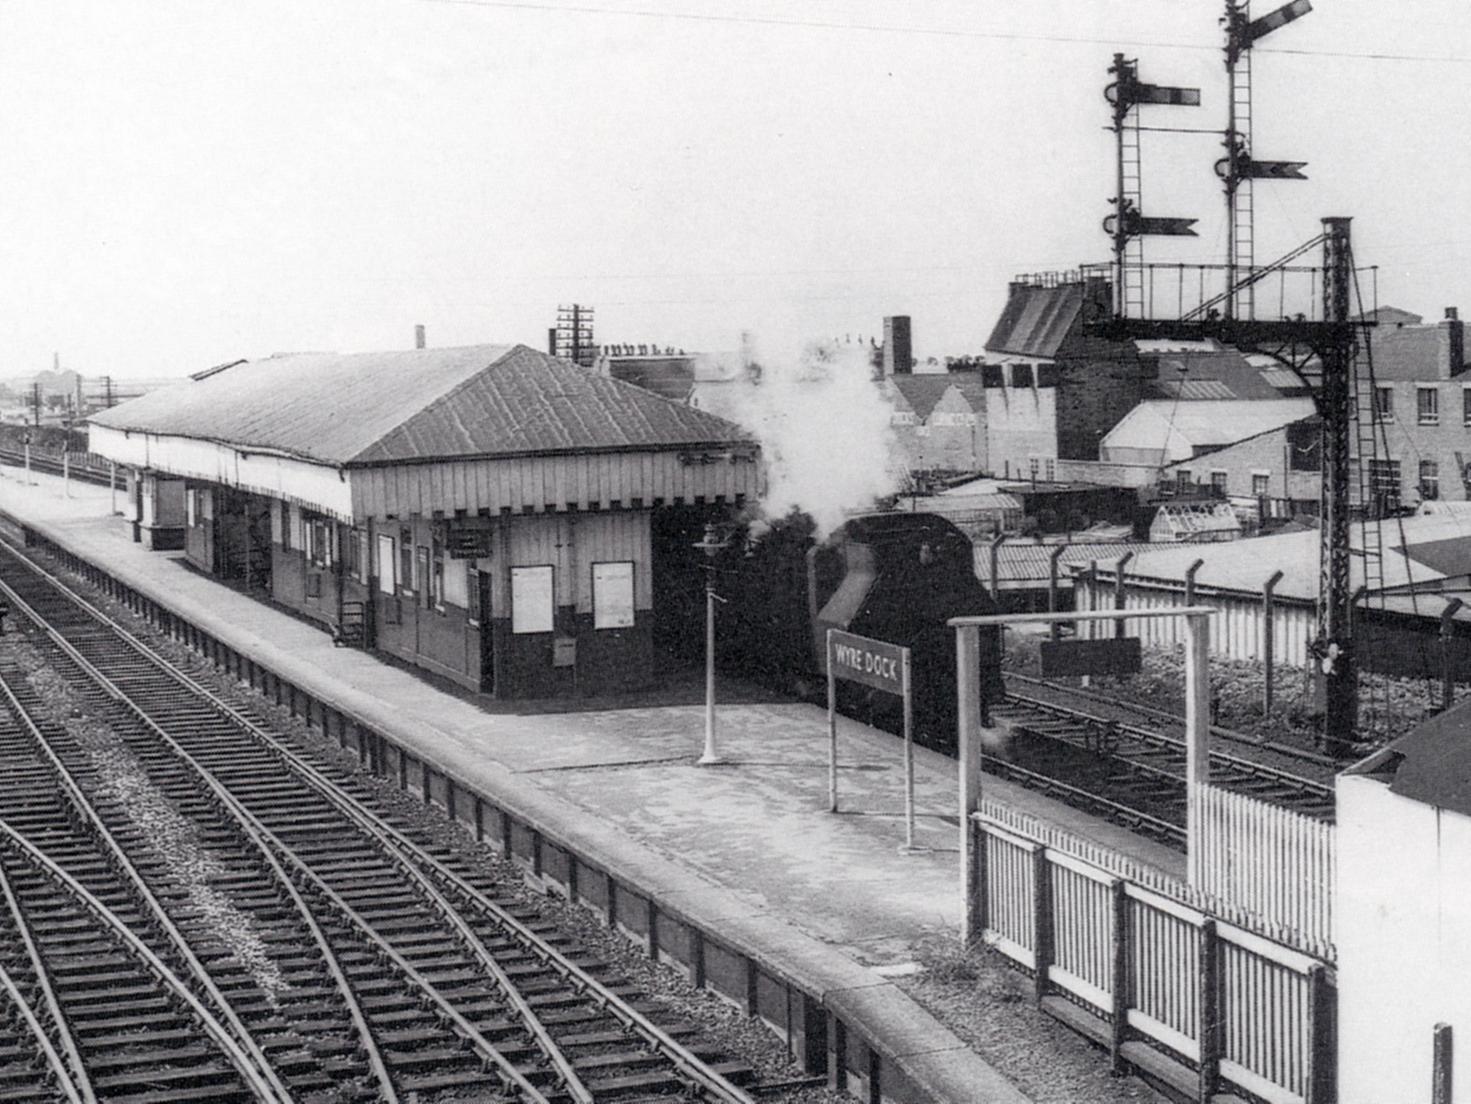 Wyre Dock Station which remained active until 1970, a few years after the main station closed down